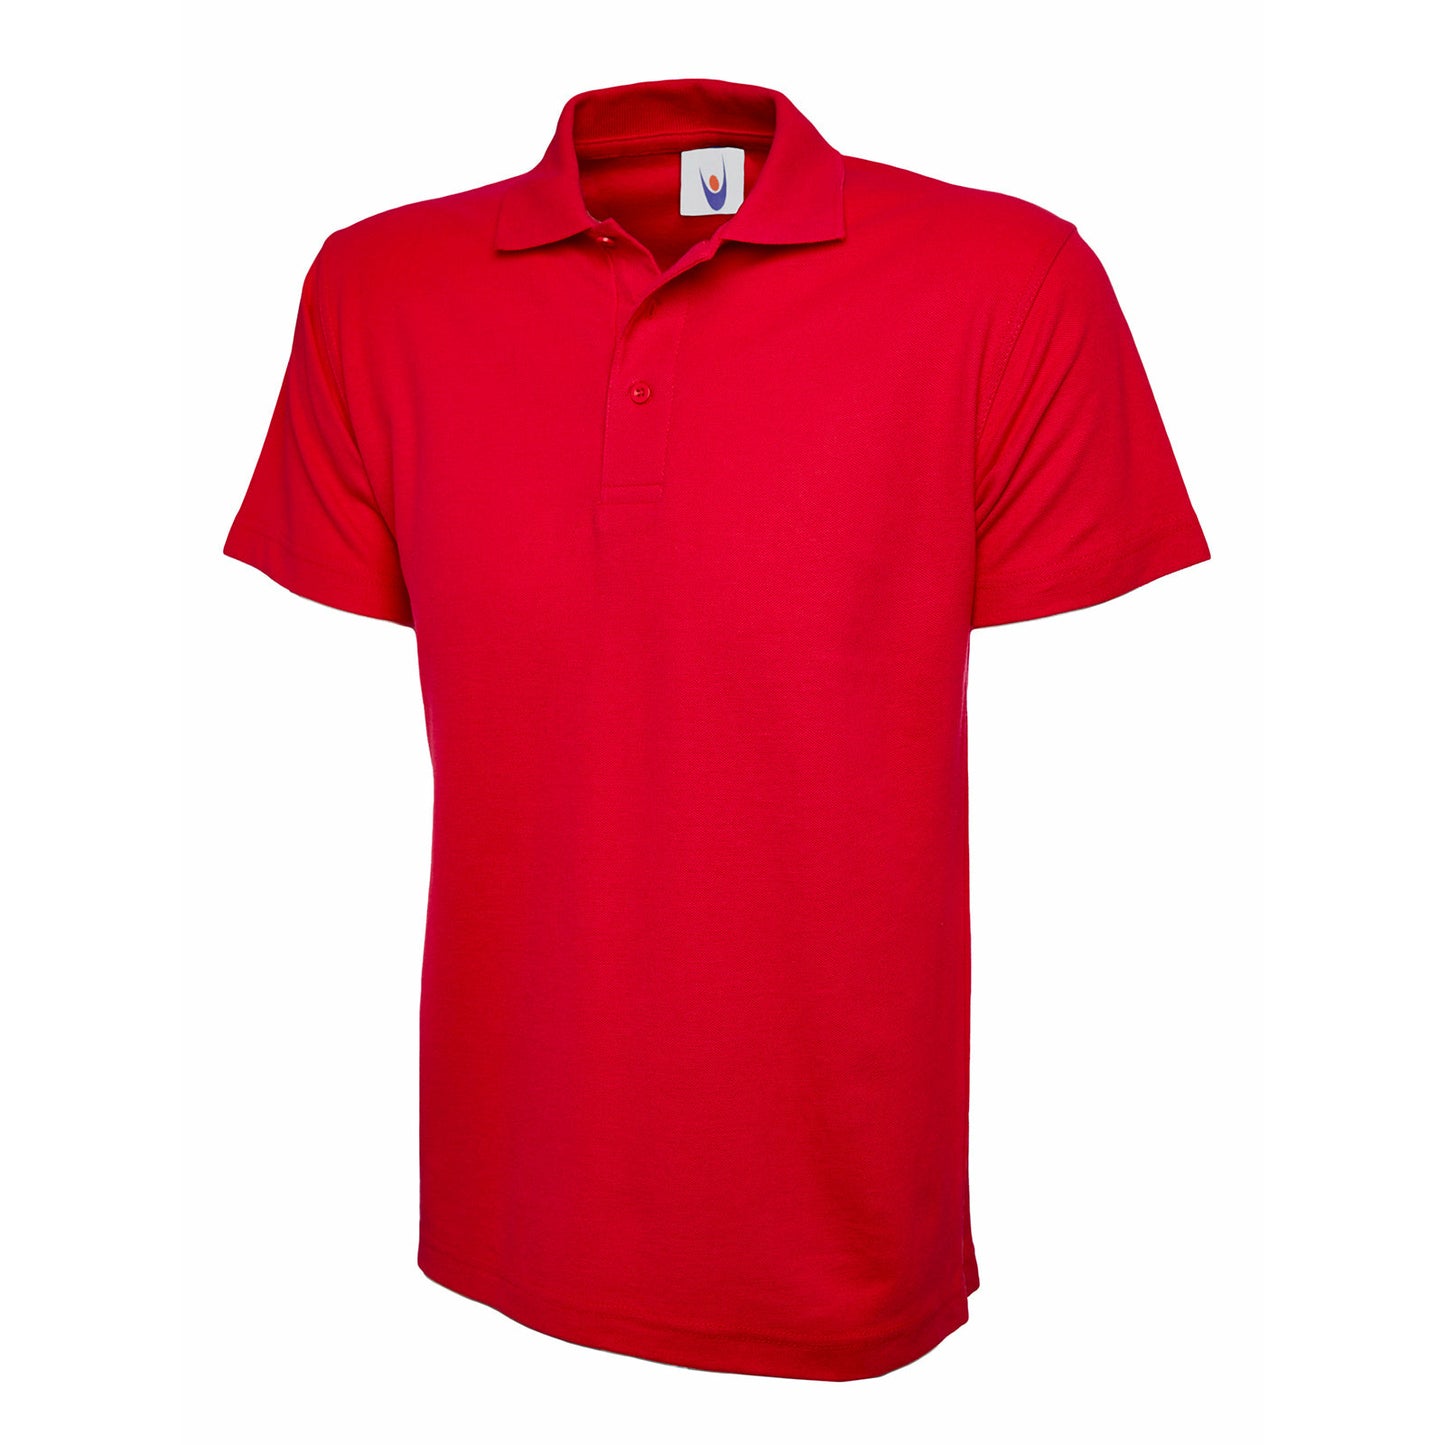 Childrens Classic Polo Shirt Red